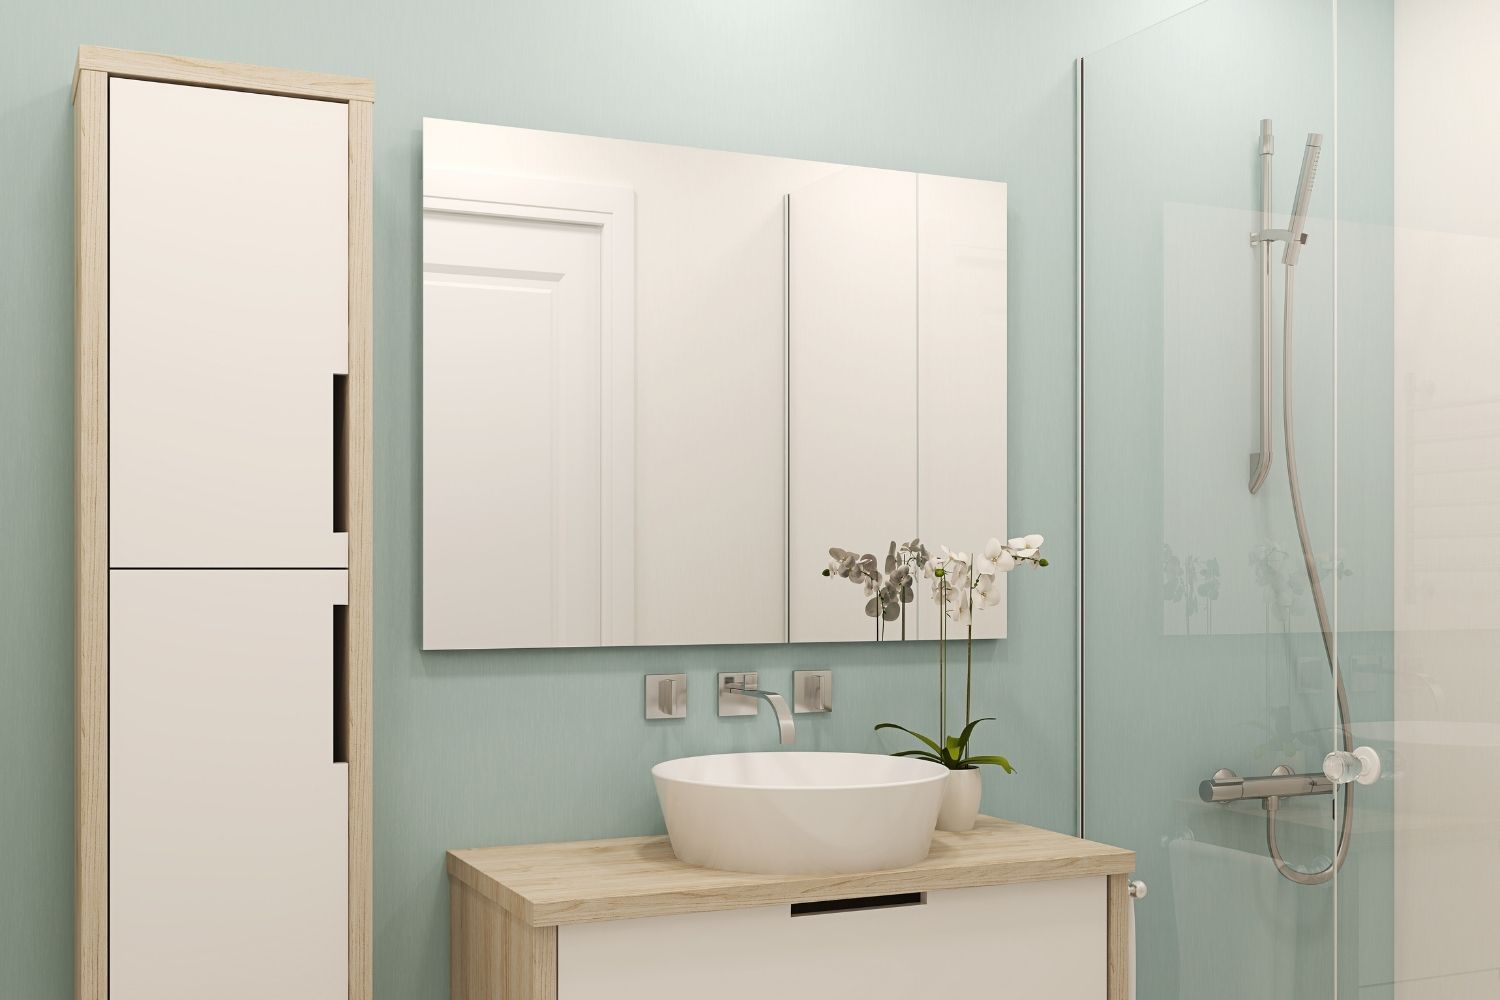 13 Of The Best Paint Colors For Small, Small Bathroom Paint Ideas